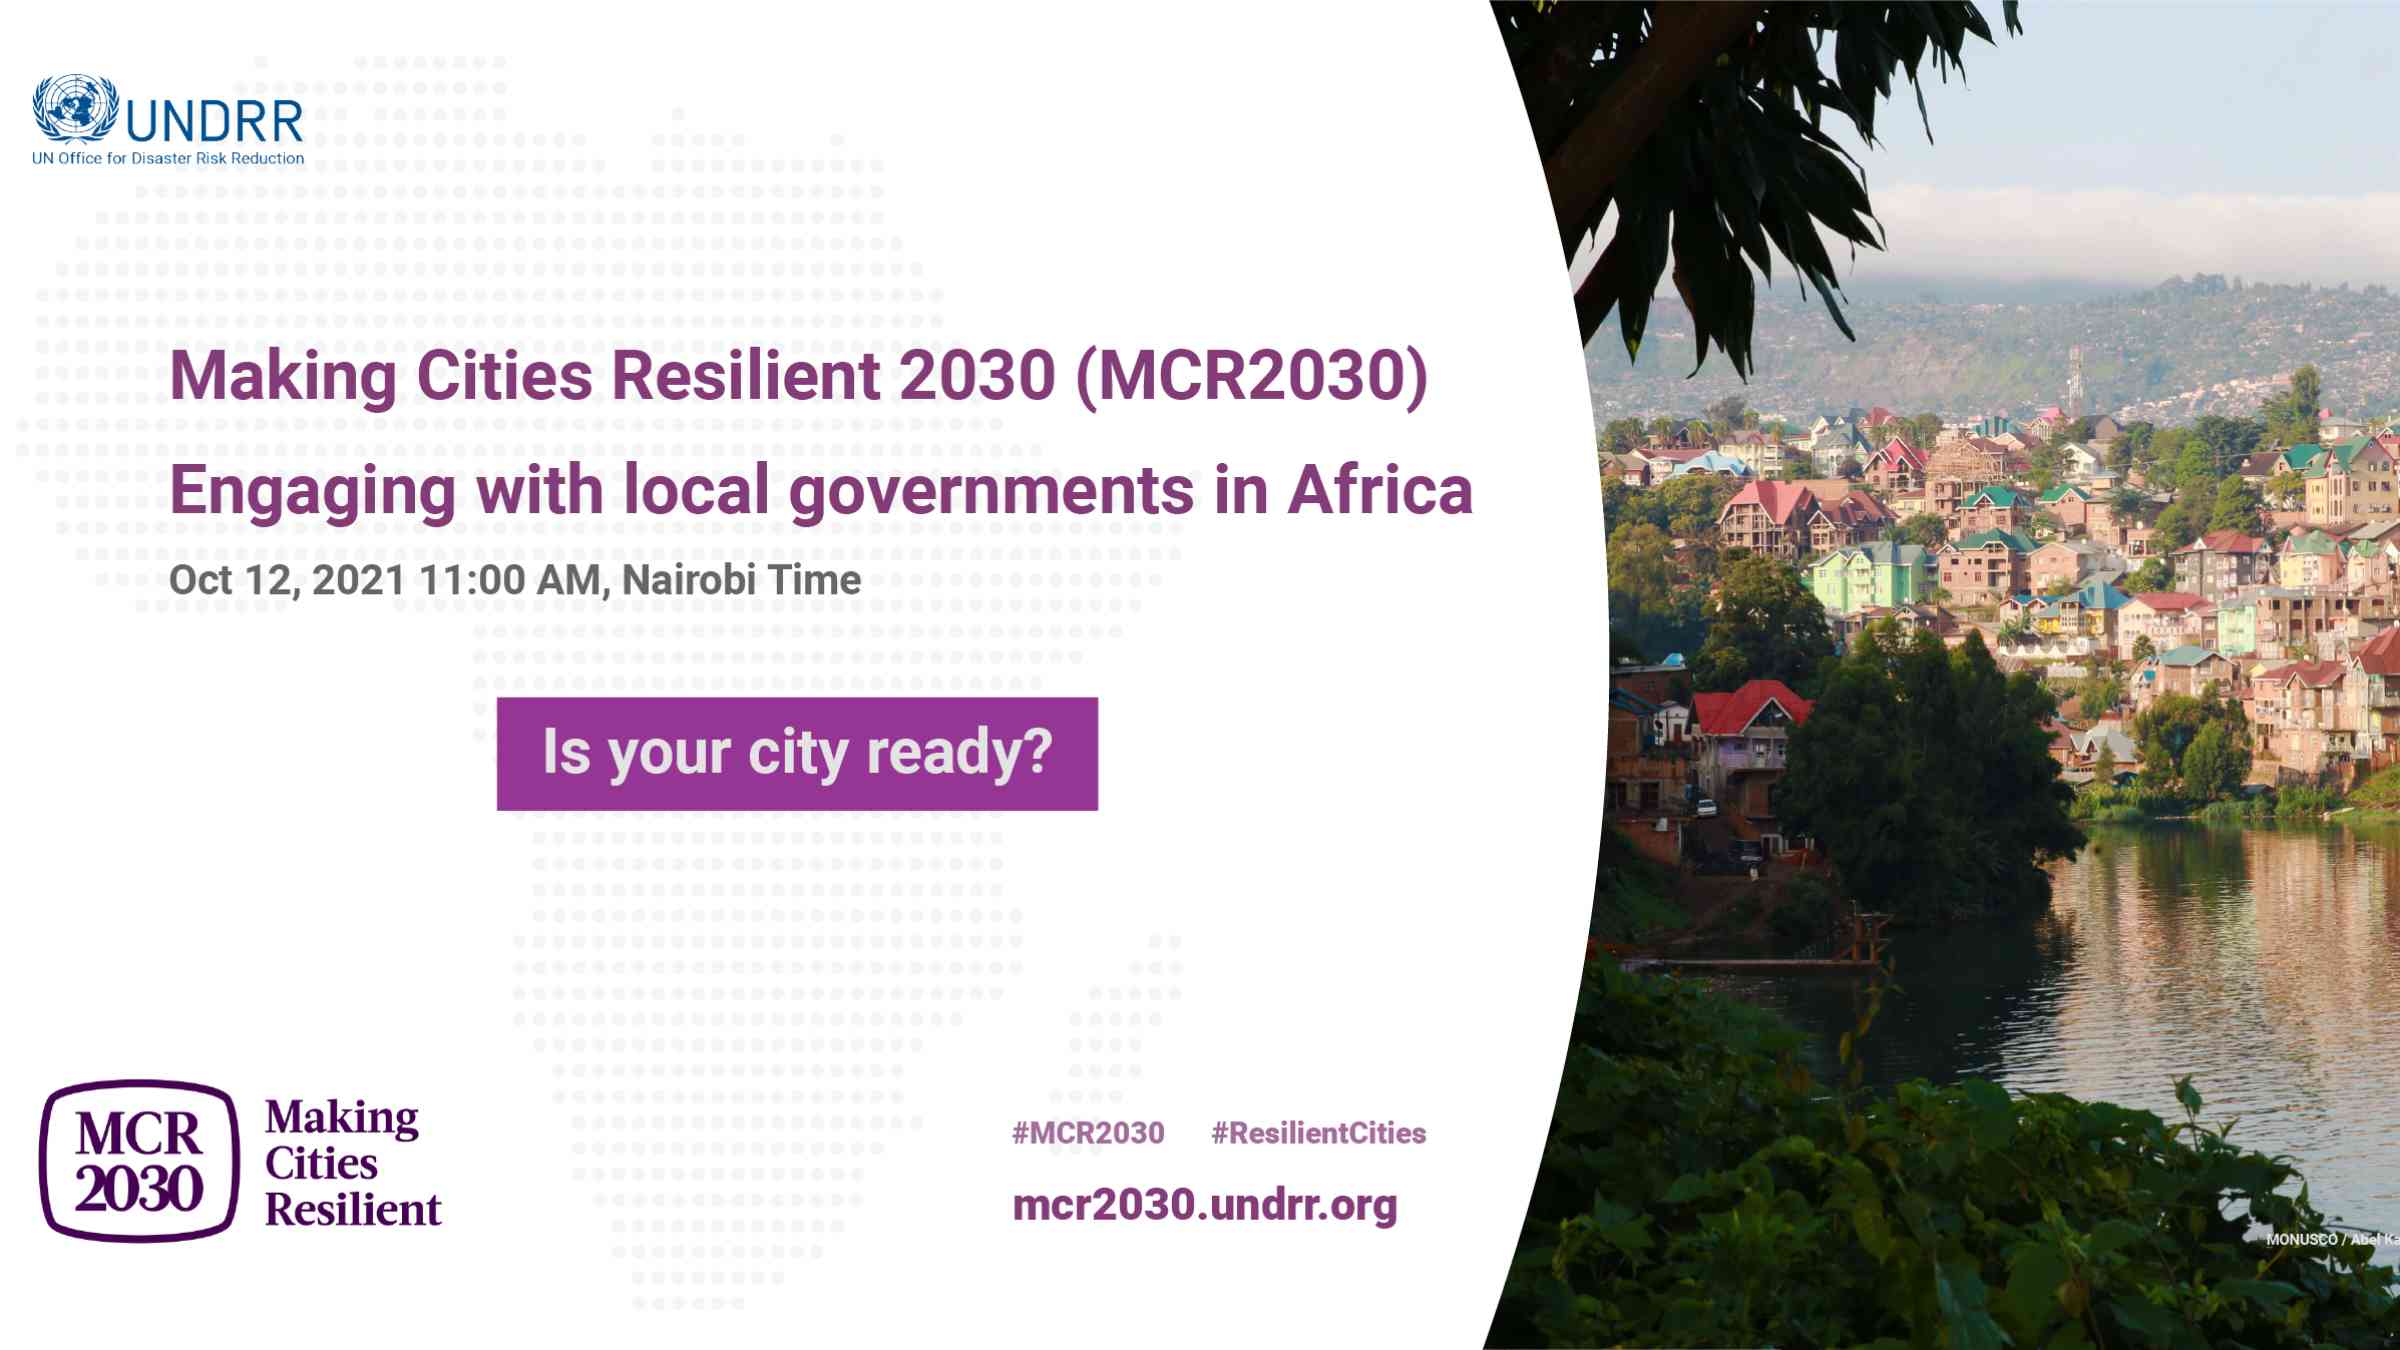 Make Cities Resilient 2030